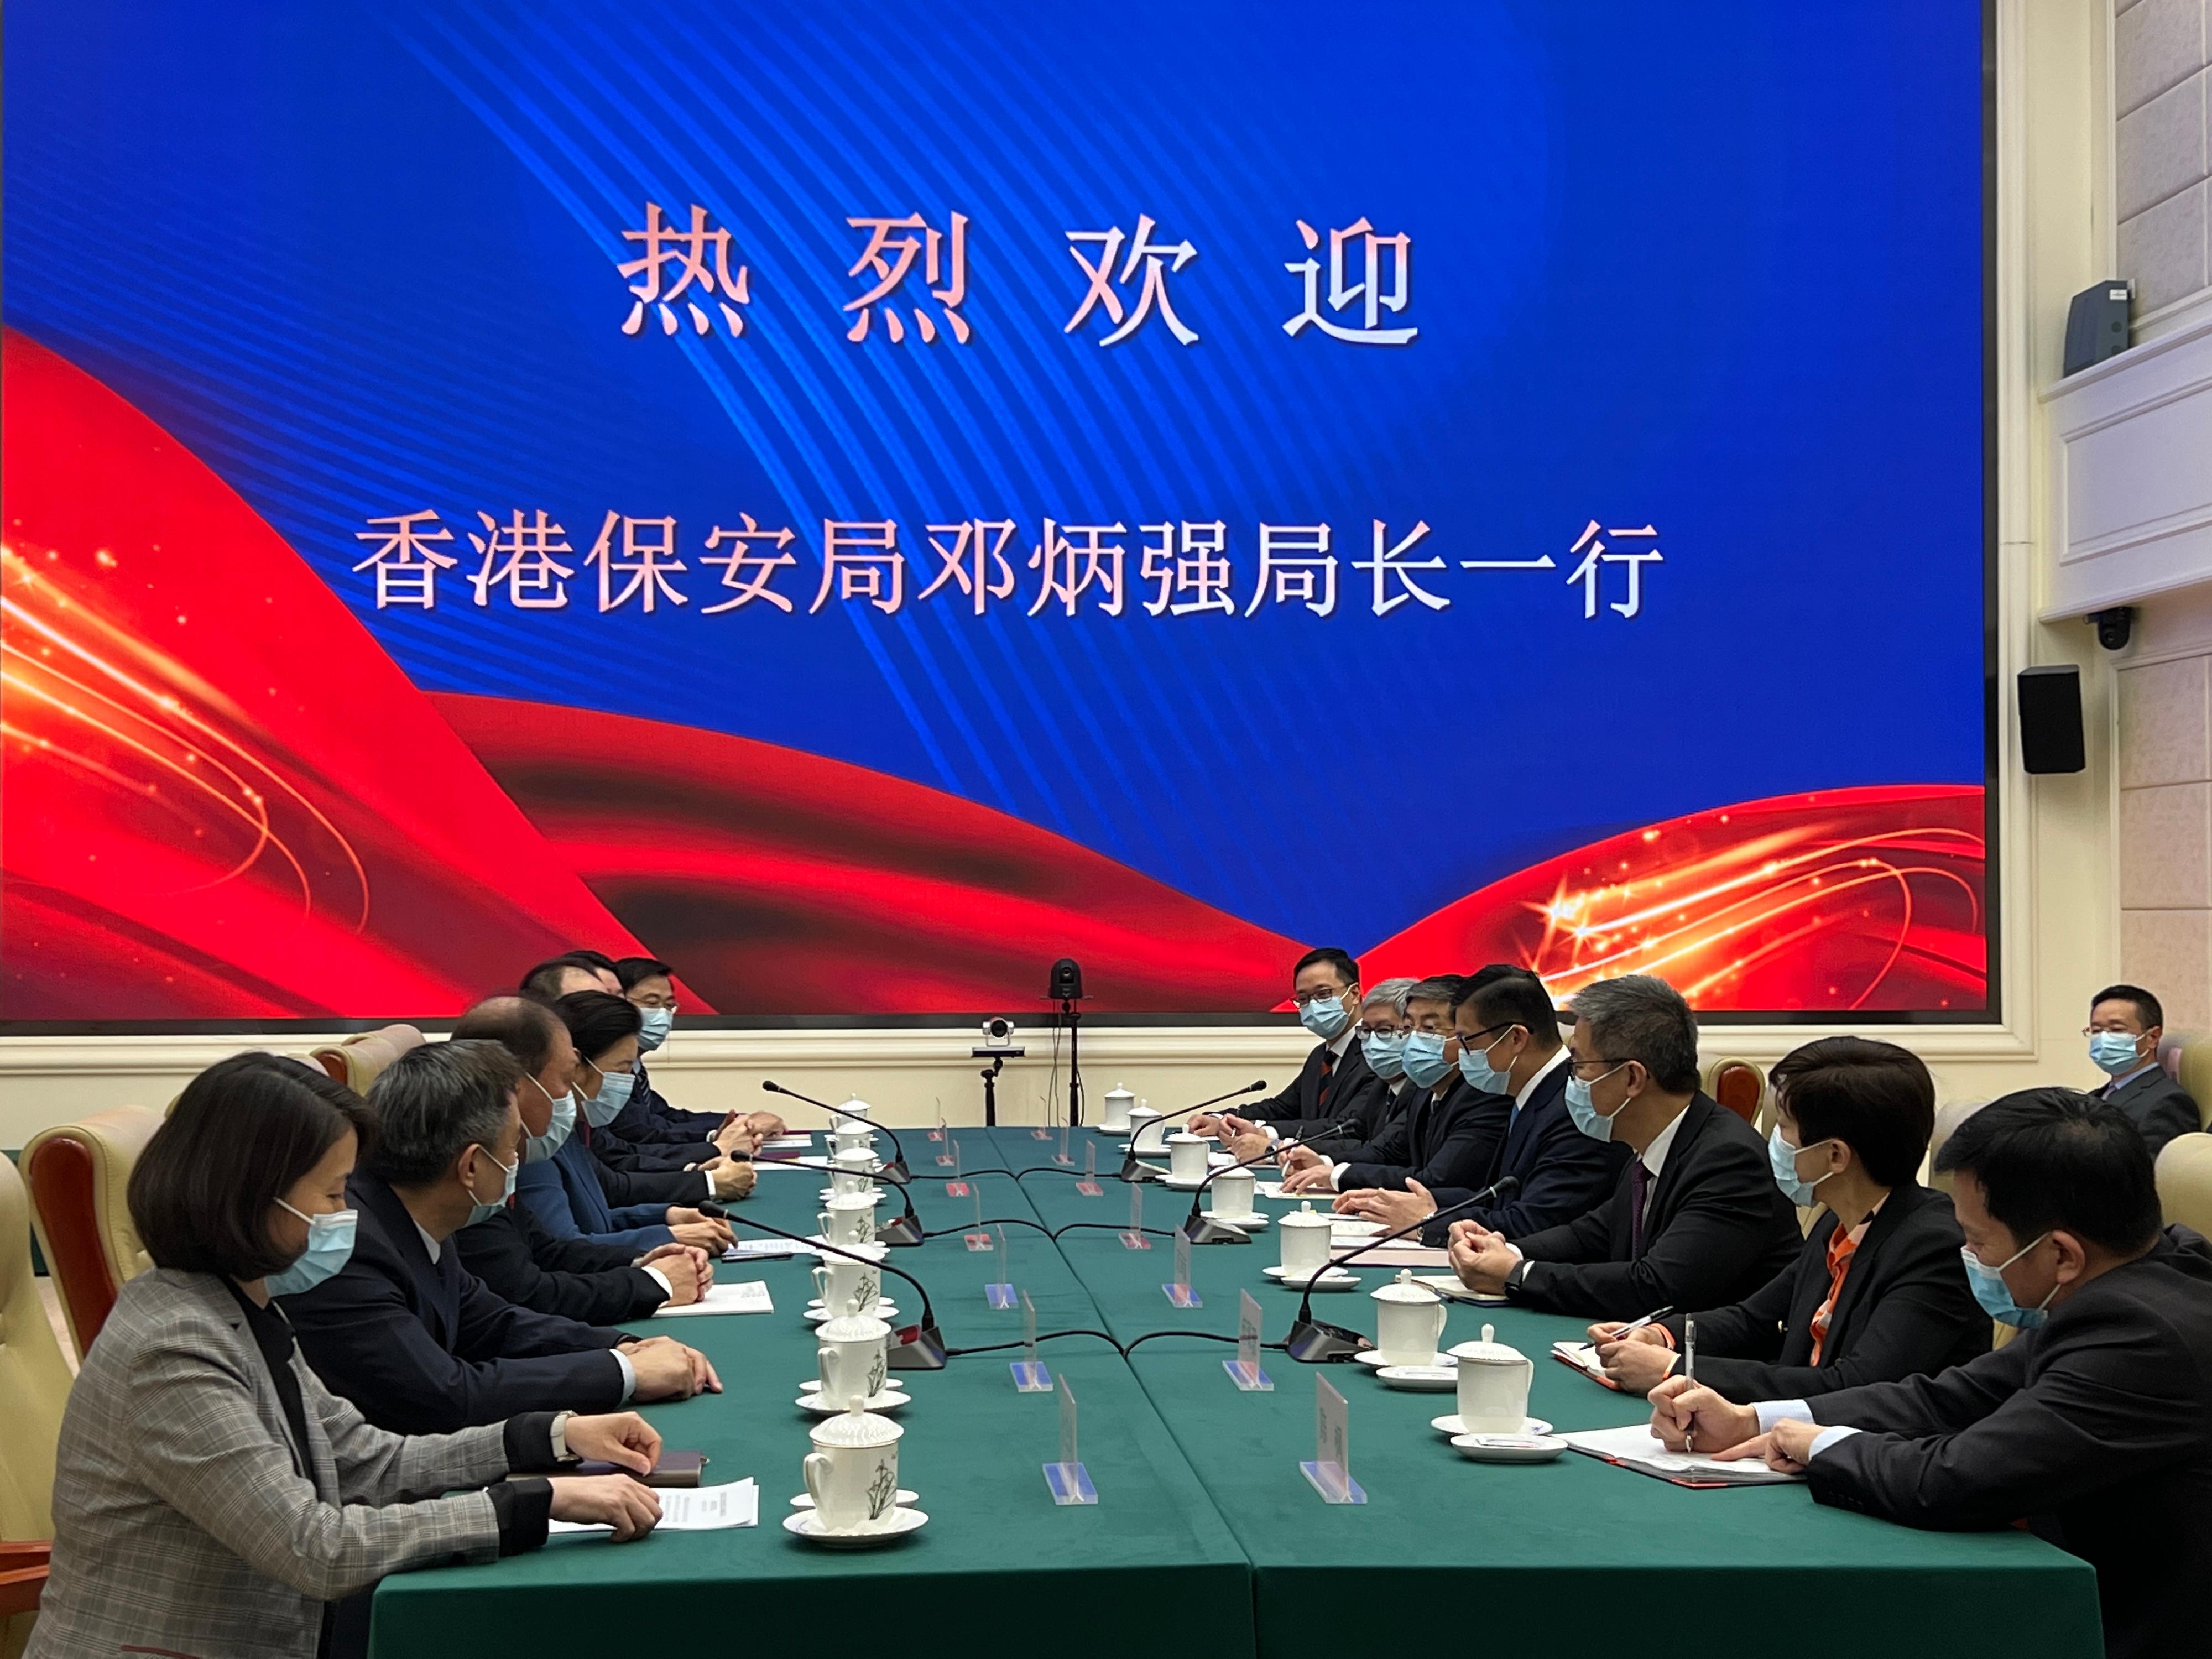 The Secretary for Security, Mr Tang Ping-keung, conducted the third day of his visit to Beijing today (April 26). Photo shows Mr Tang (fourth right) meeting with the Ministry of Justice.